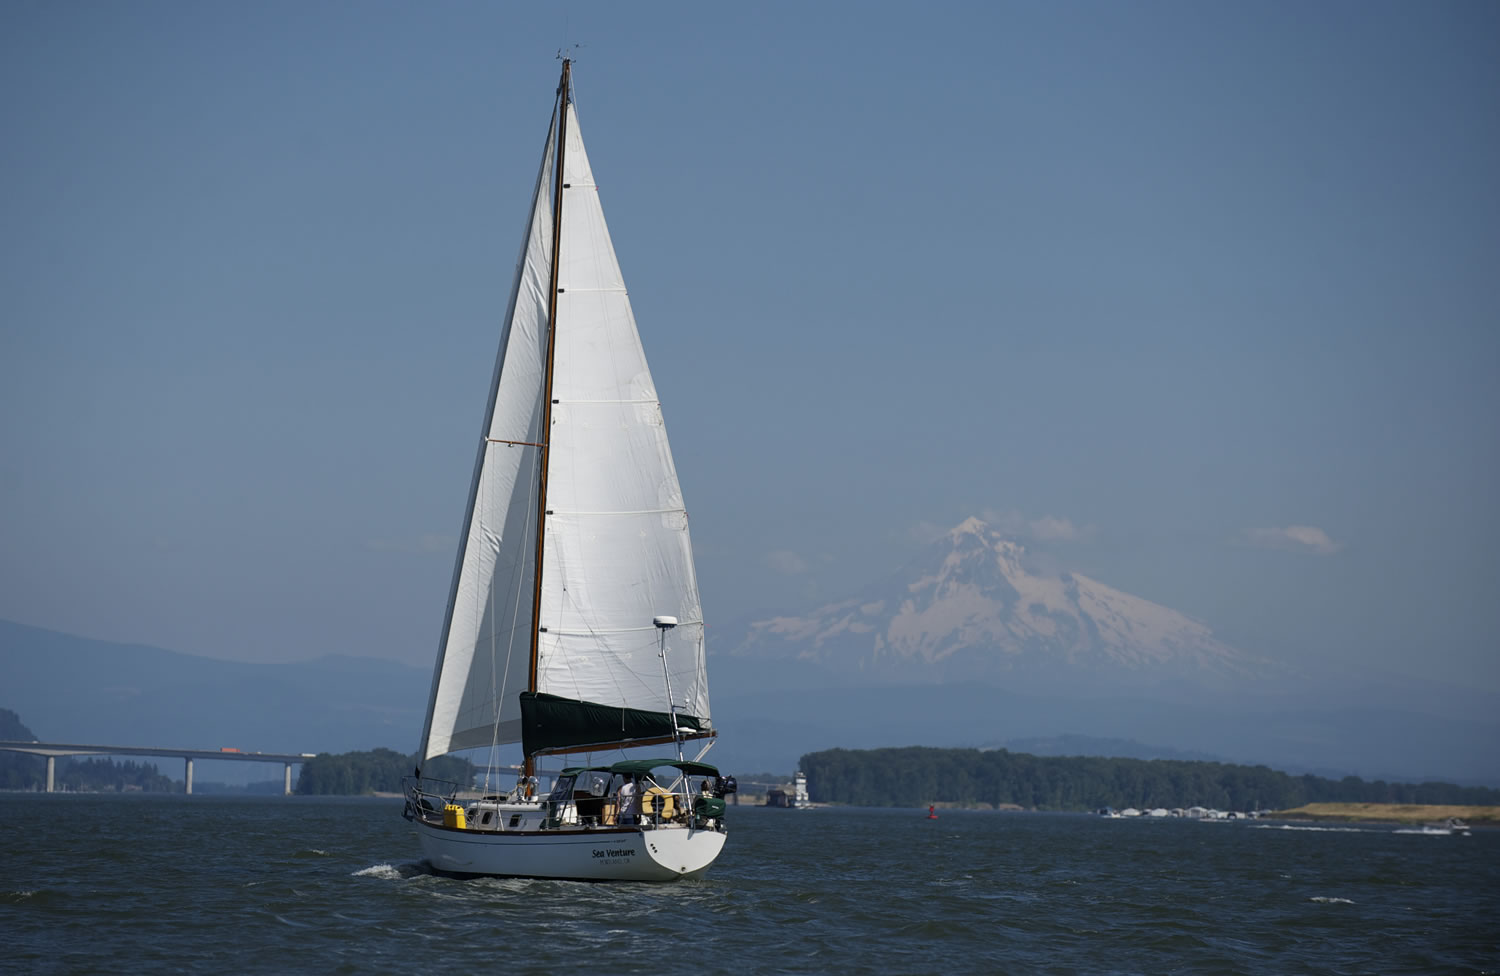 Sailboats abound on the Columbia River.